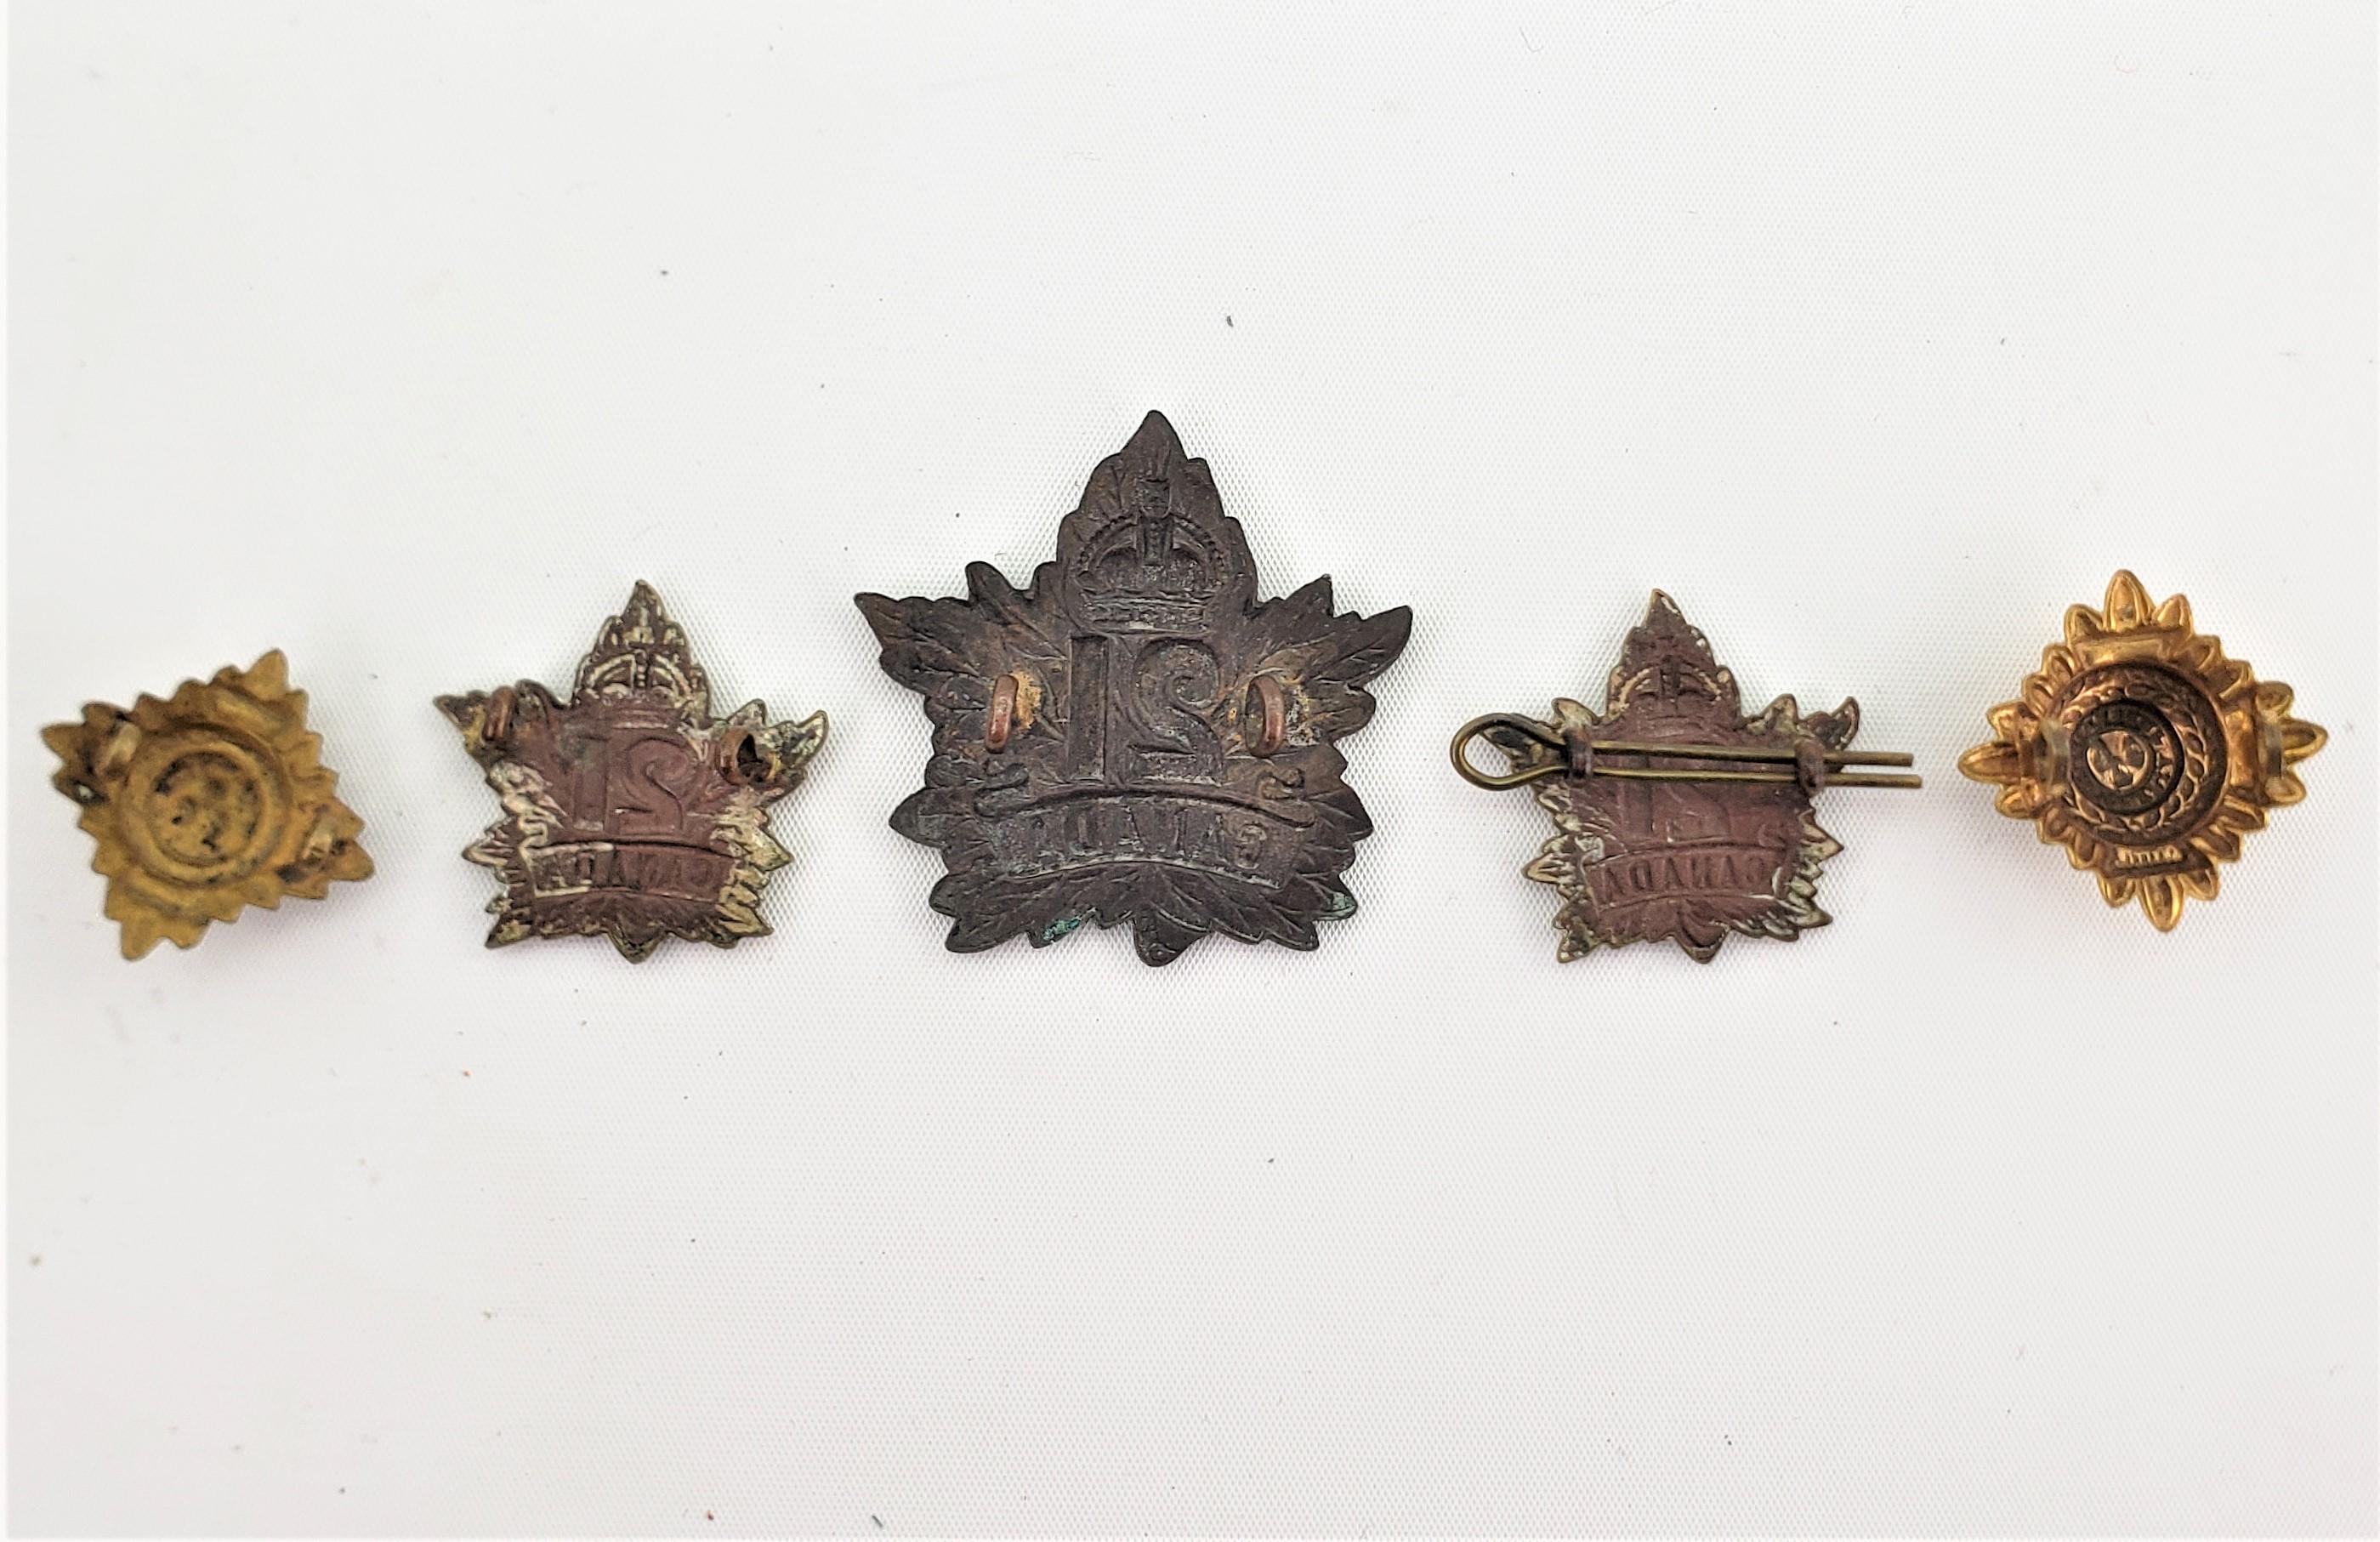 Paper Canadian WW1 21st Regiment Soldier's Uniform Buttons, Badges & Medals Grouping For Sale